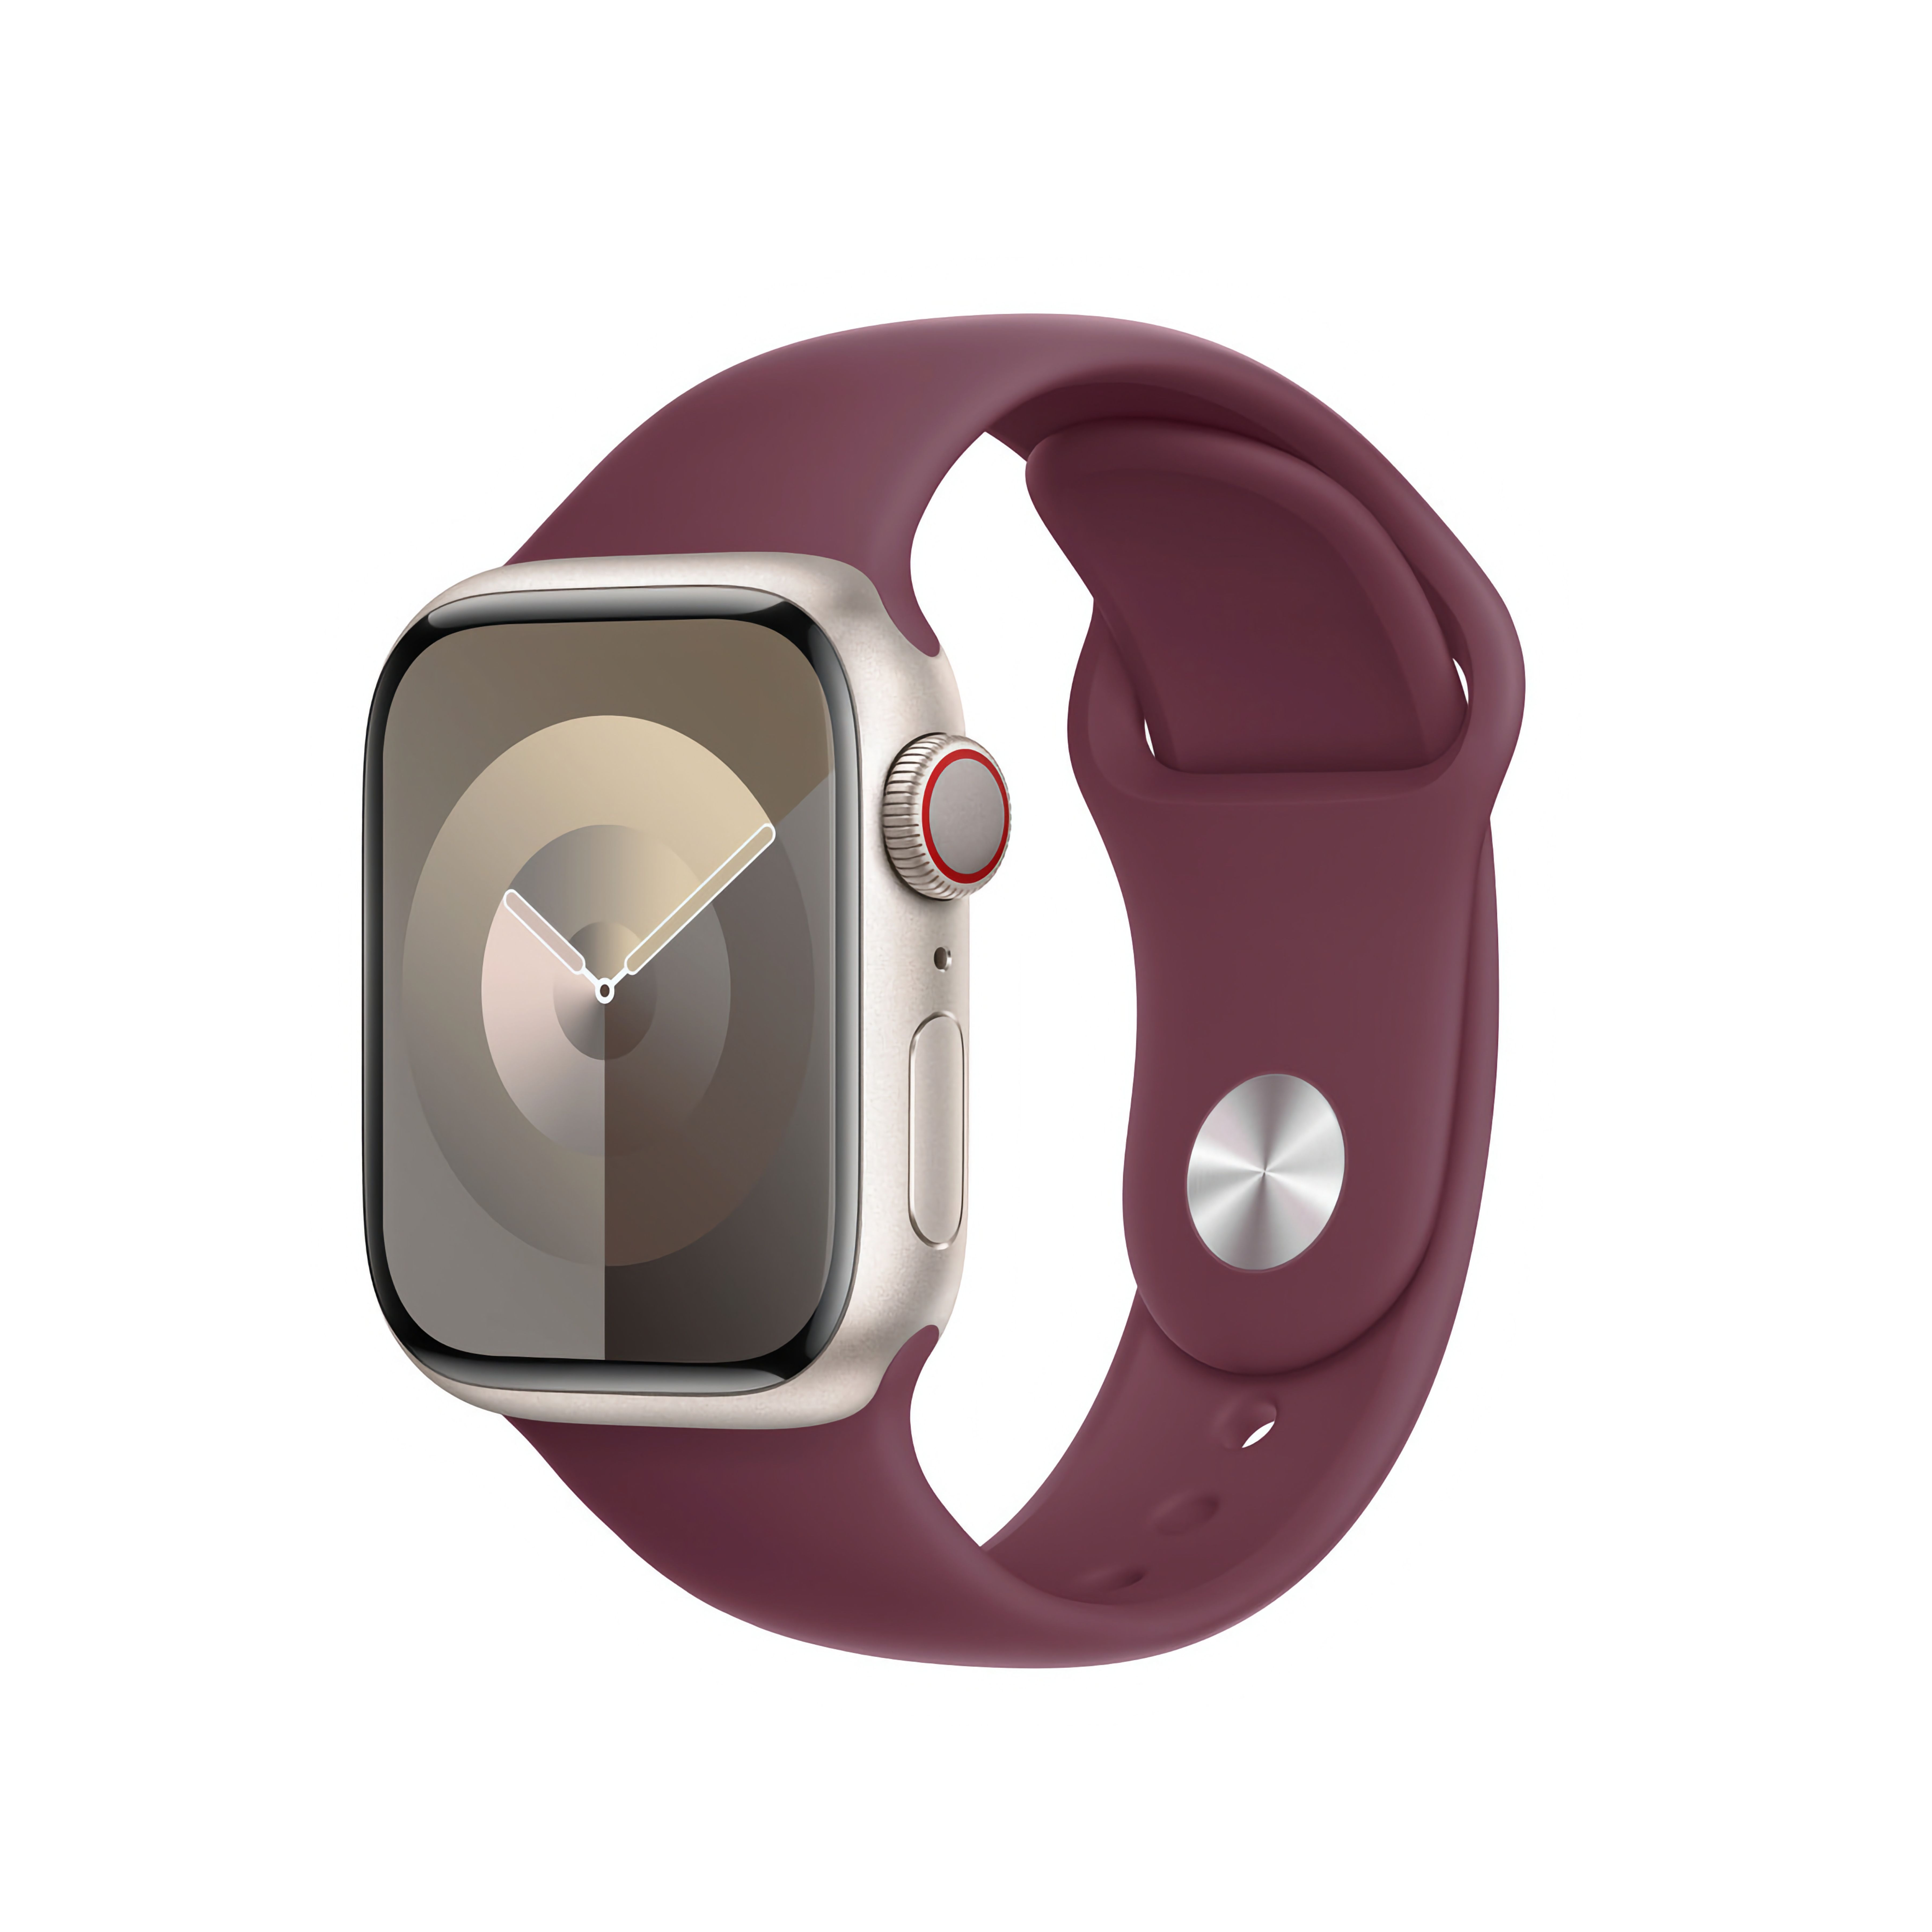 A rose gold Apple Watch with a purple rubber watch band.